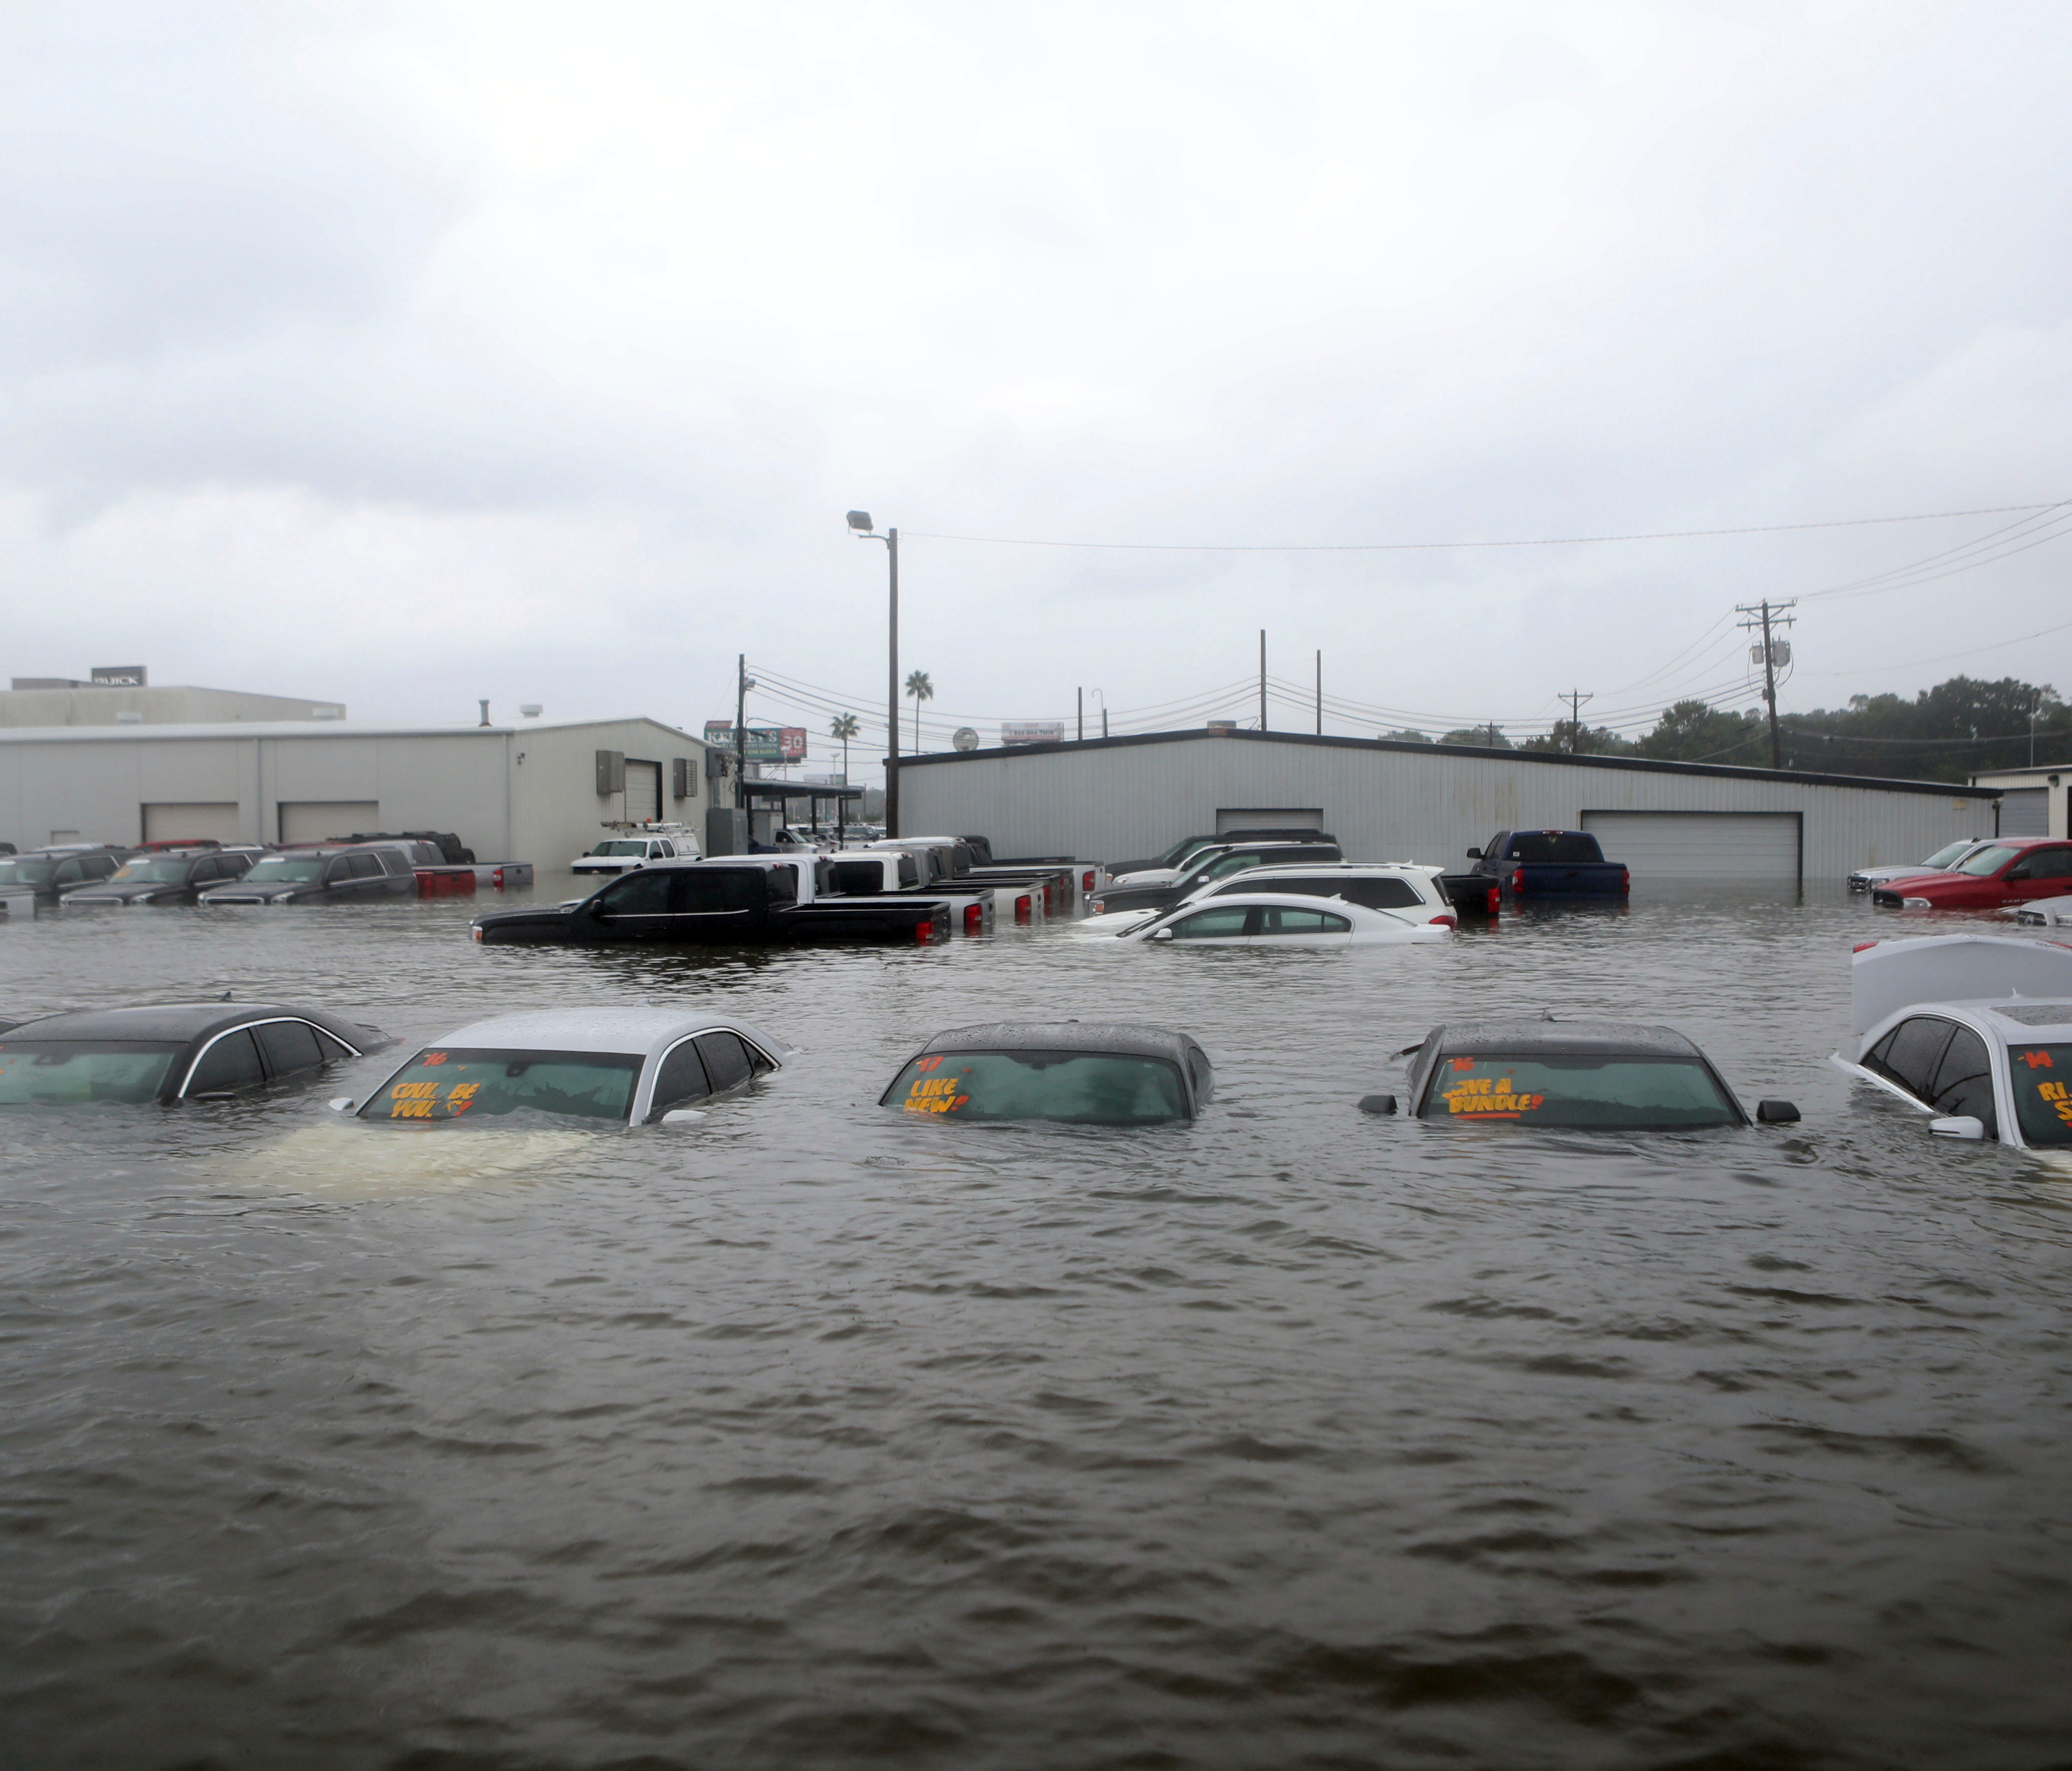 Vehicles are seen submerged at a dealership off Interstate 45 in Dickinson, Texas, on Aug. 27 as Hurricane Harvey ravaged the region.